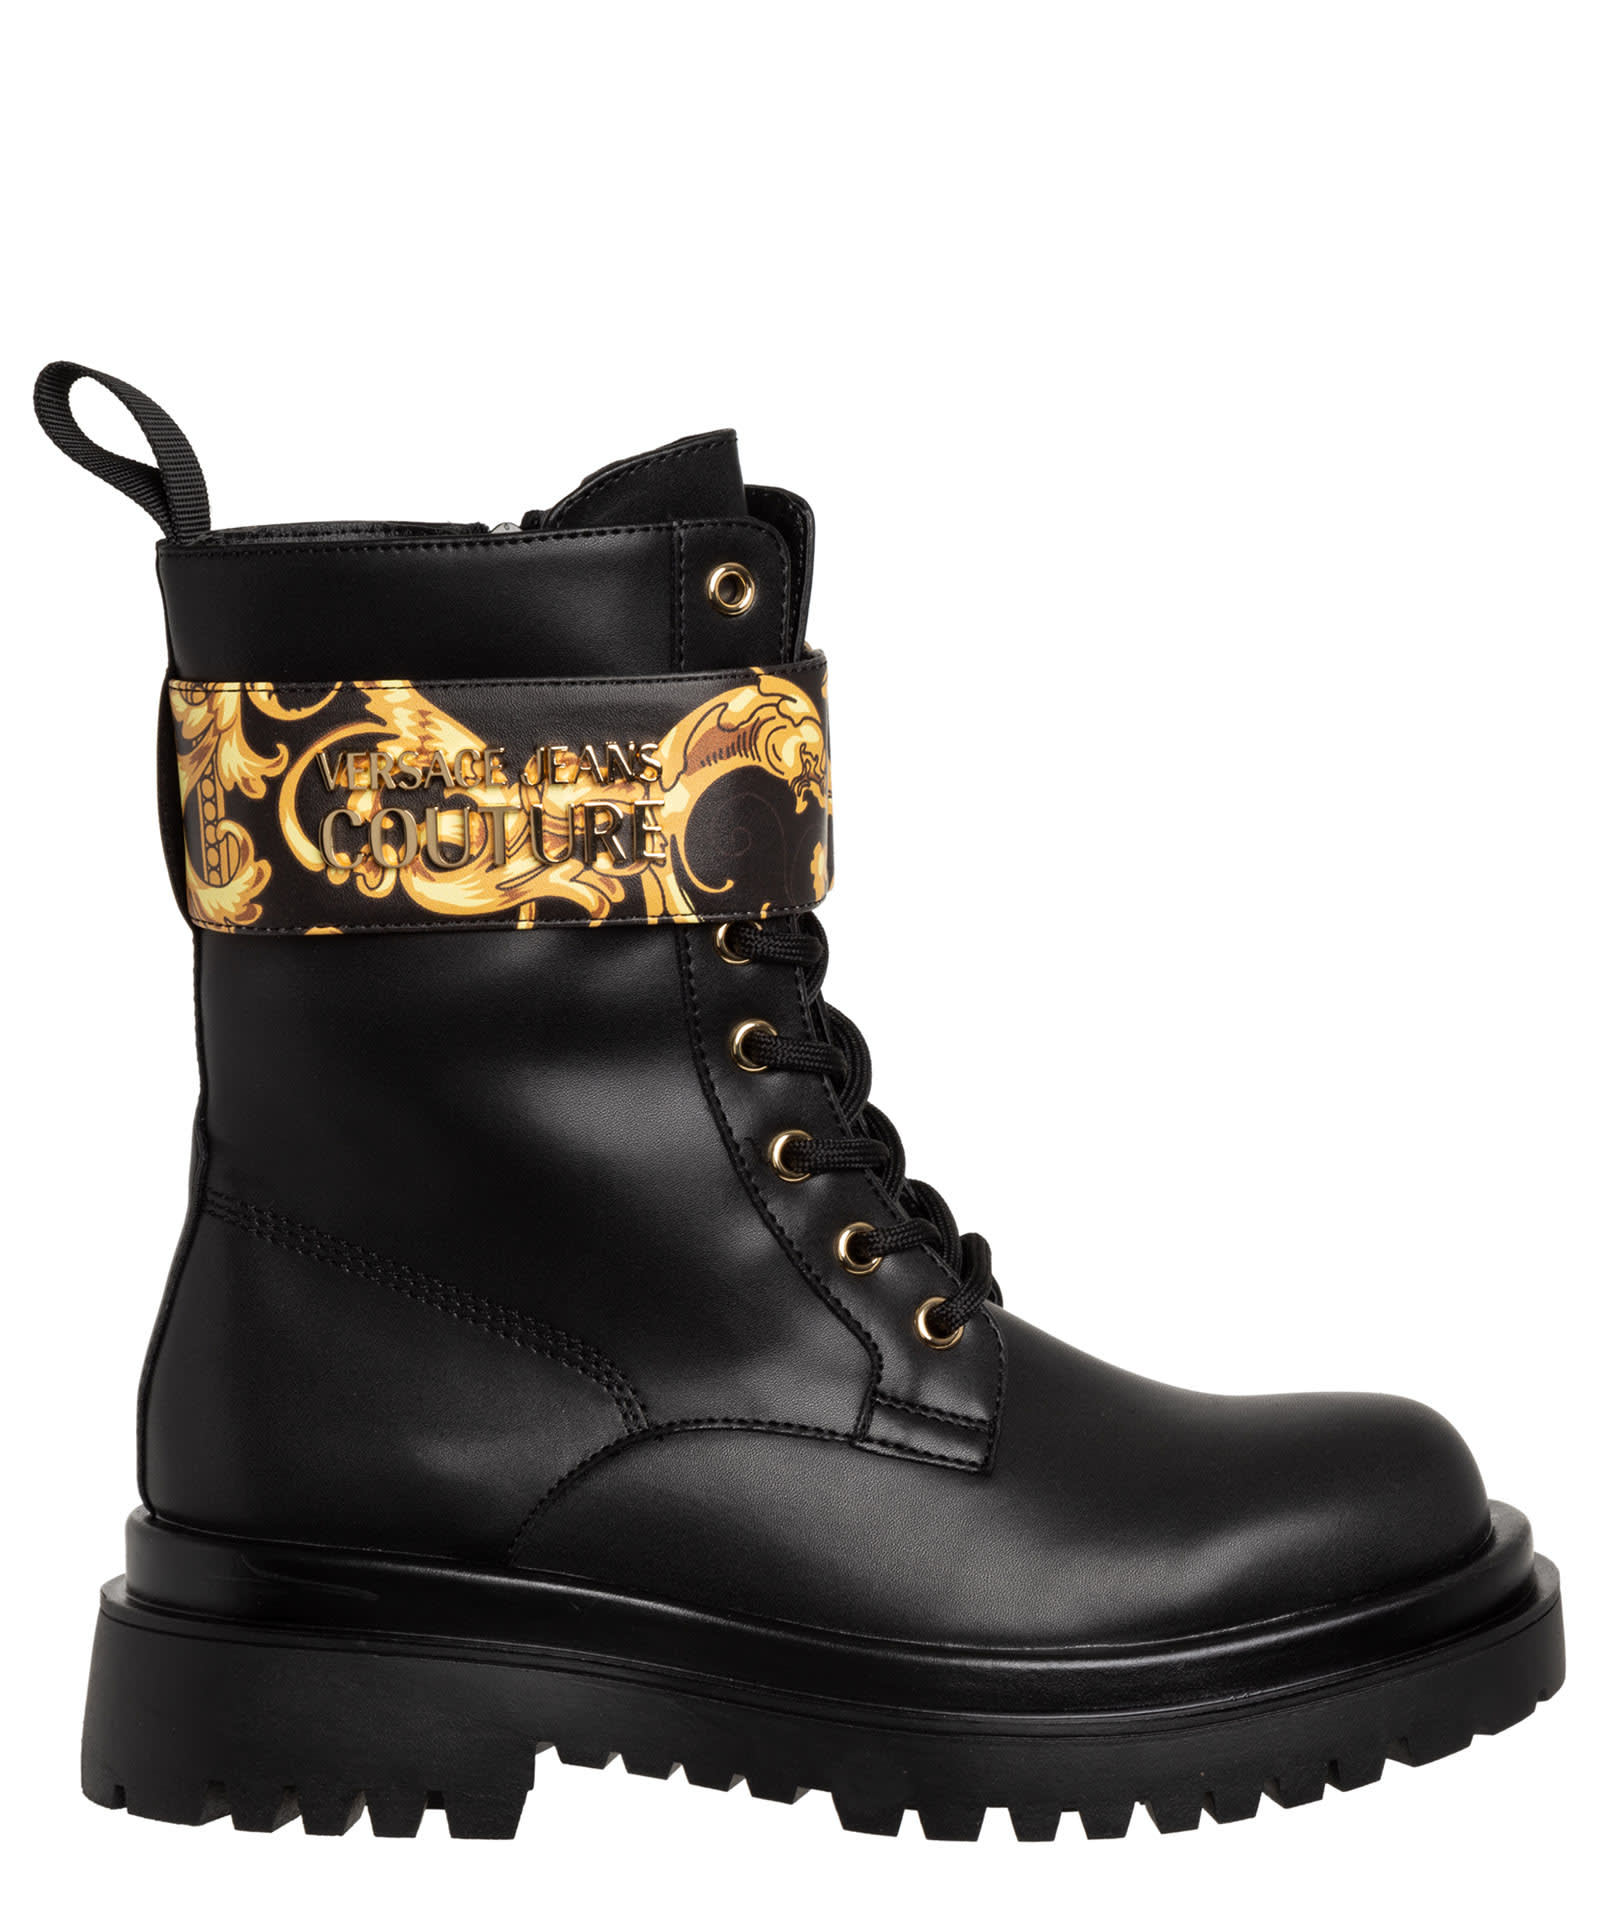 Versace Jeans Couture Garland Ankle Boots